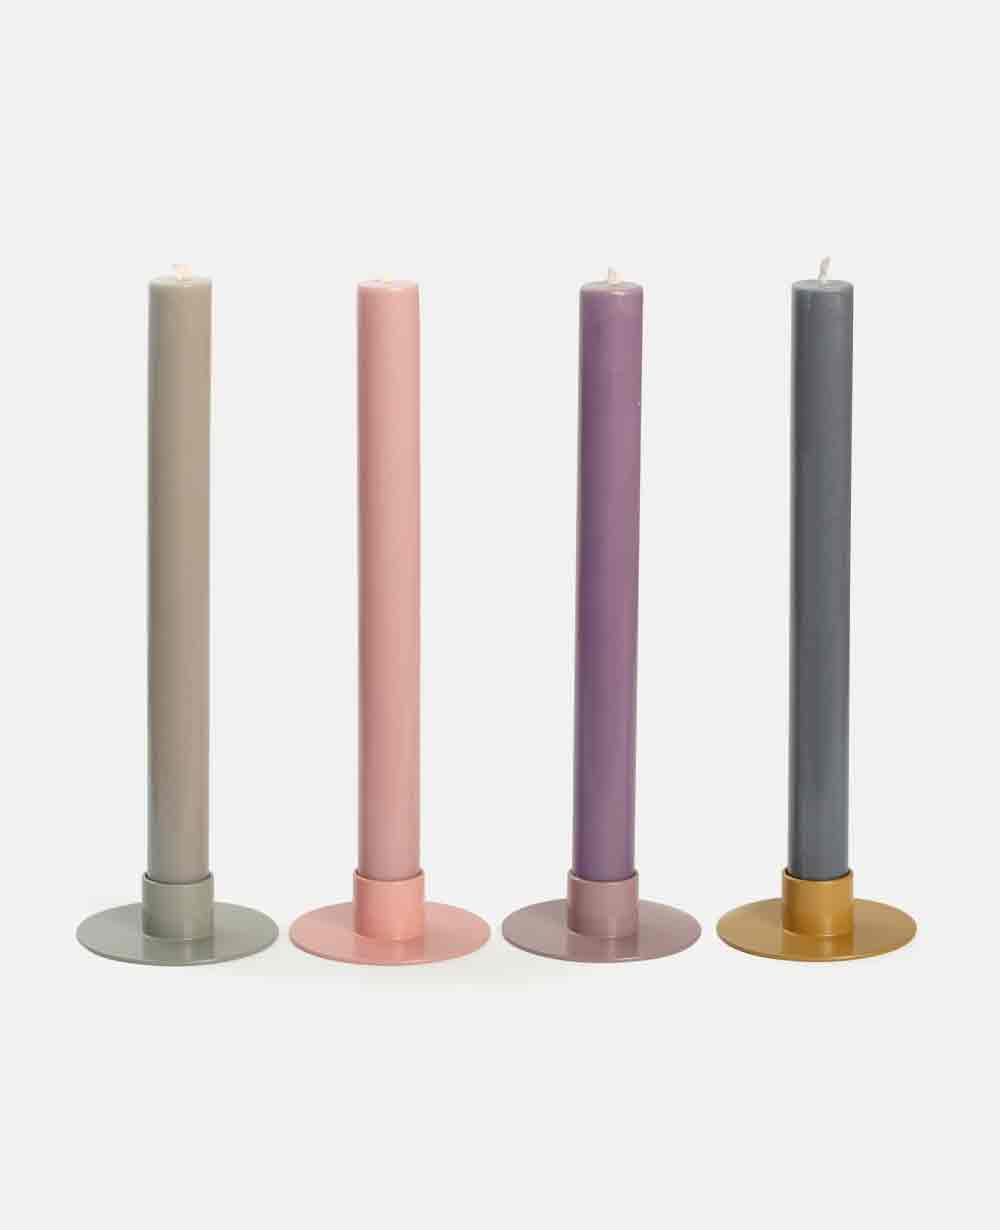 CANDLE SET OF 4 "DINNER”